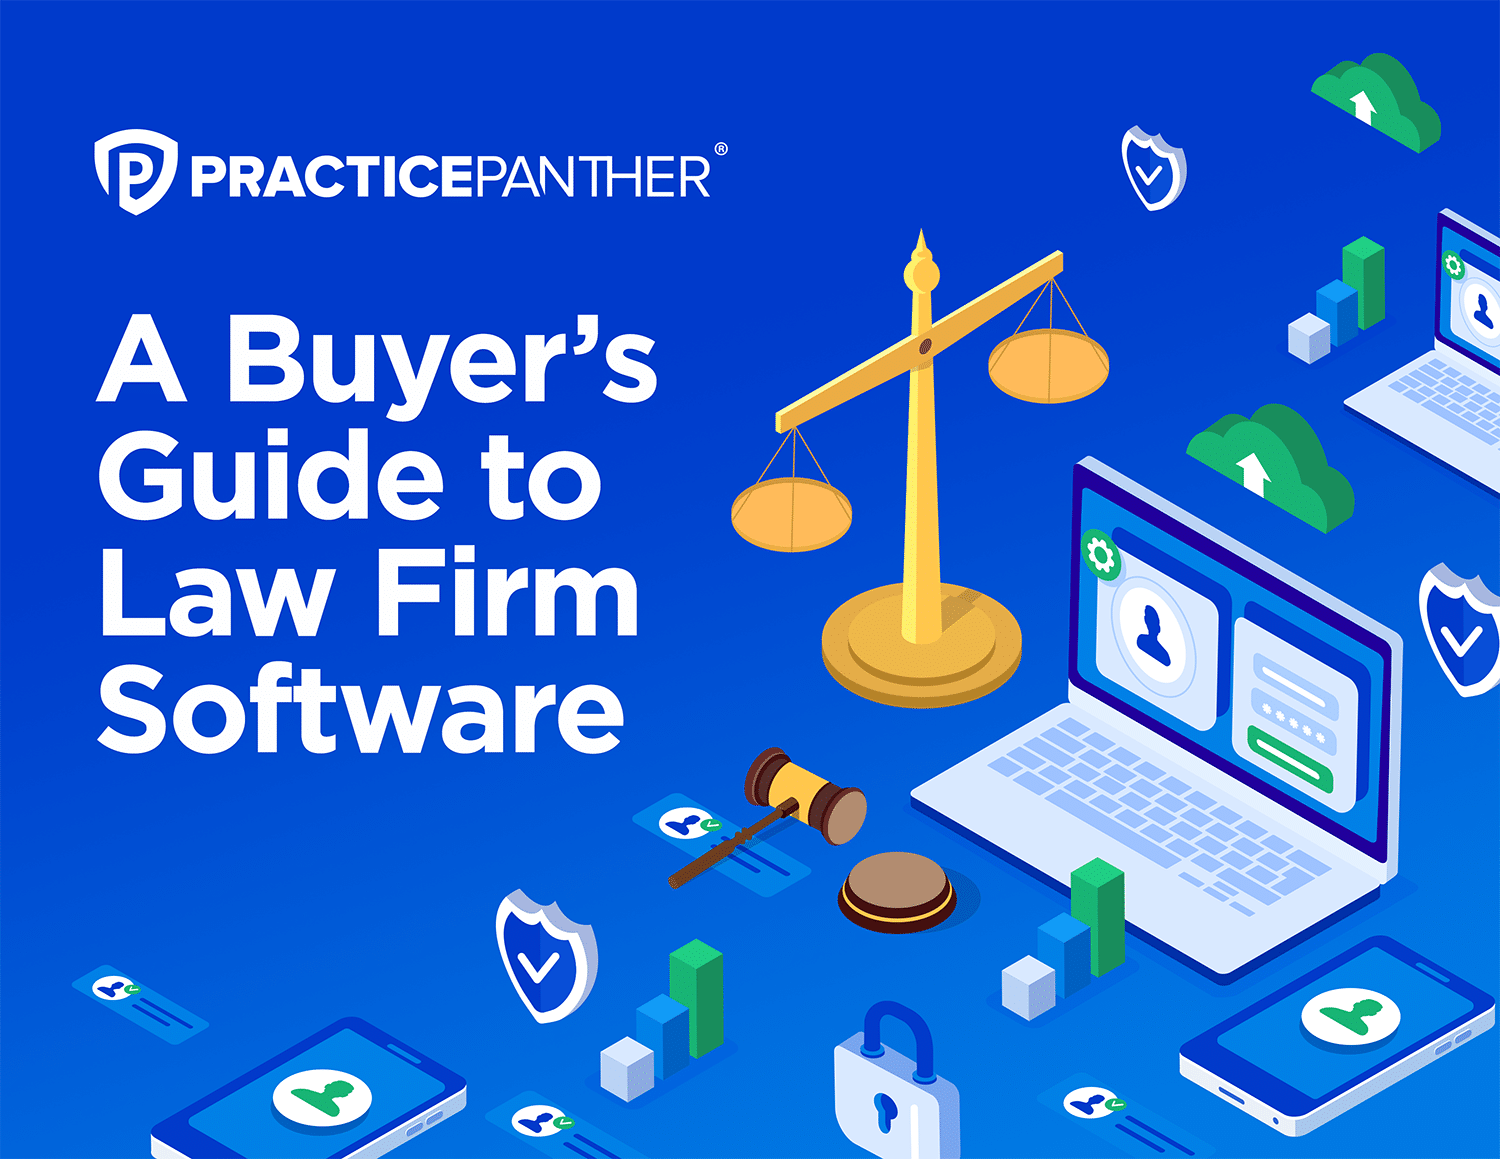 Download the Buyer's Guide to Law Firm Software